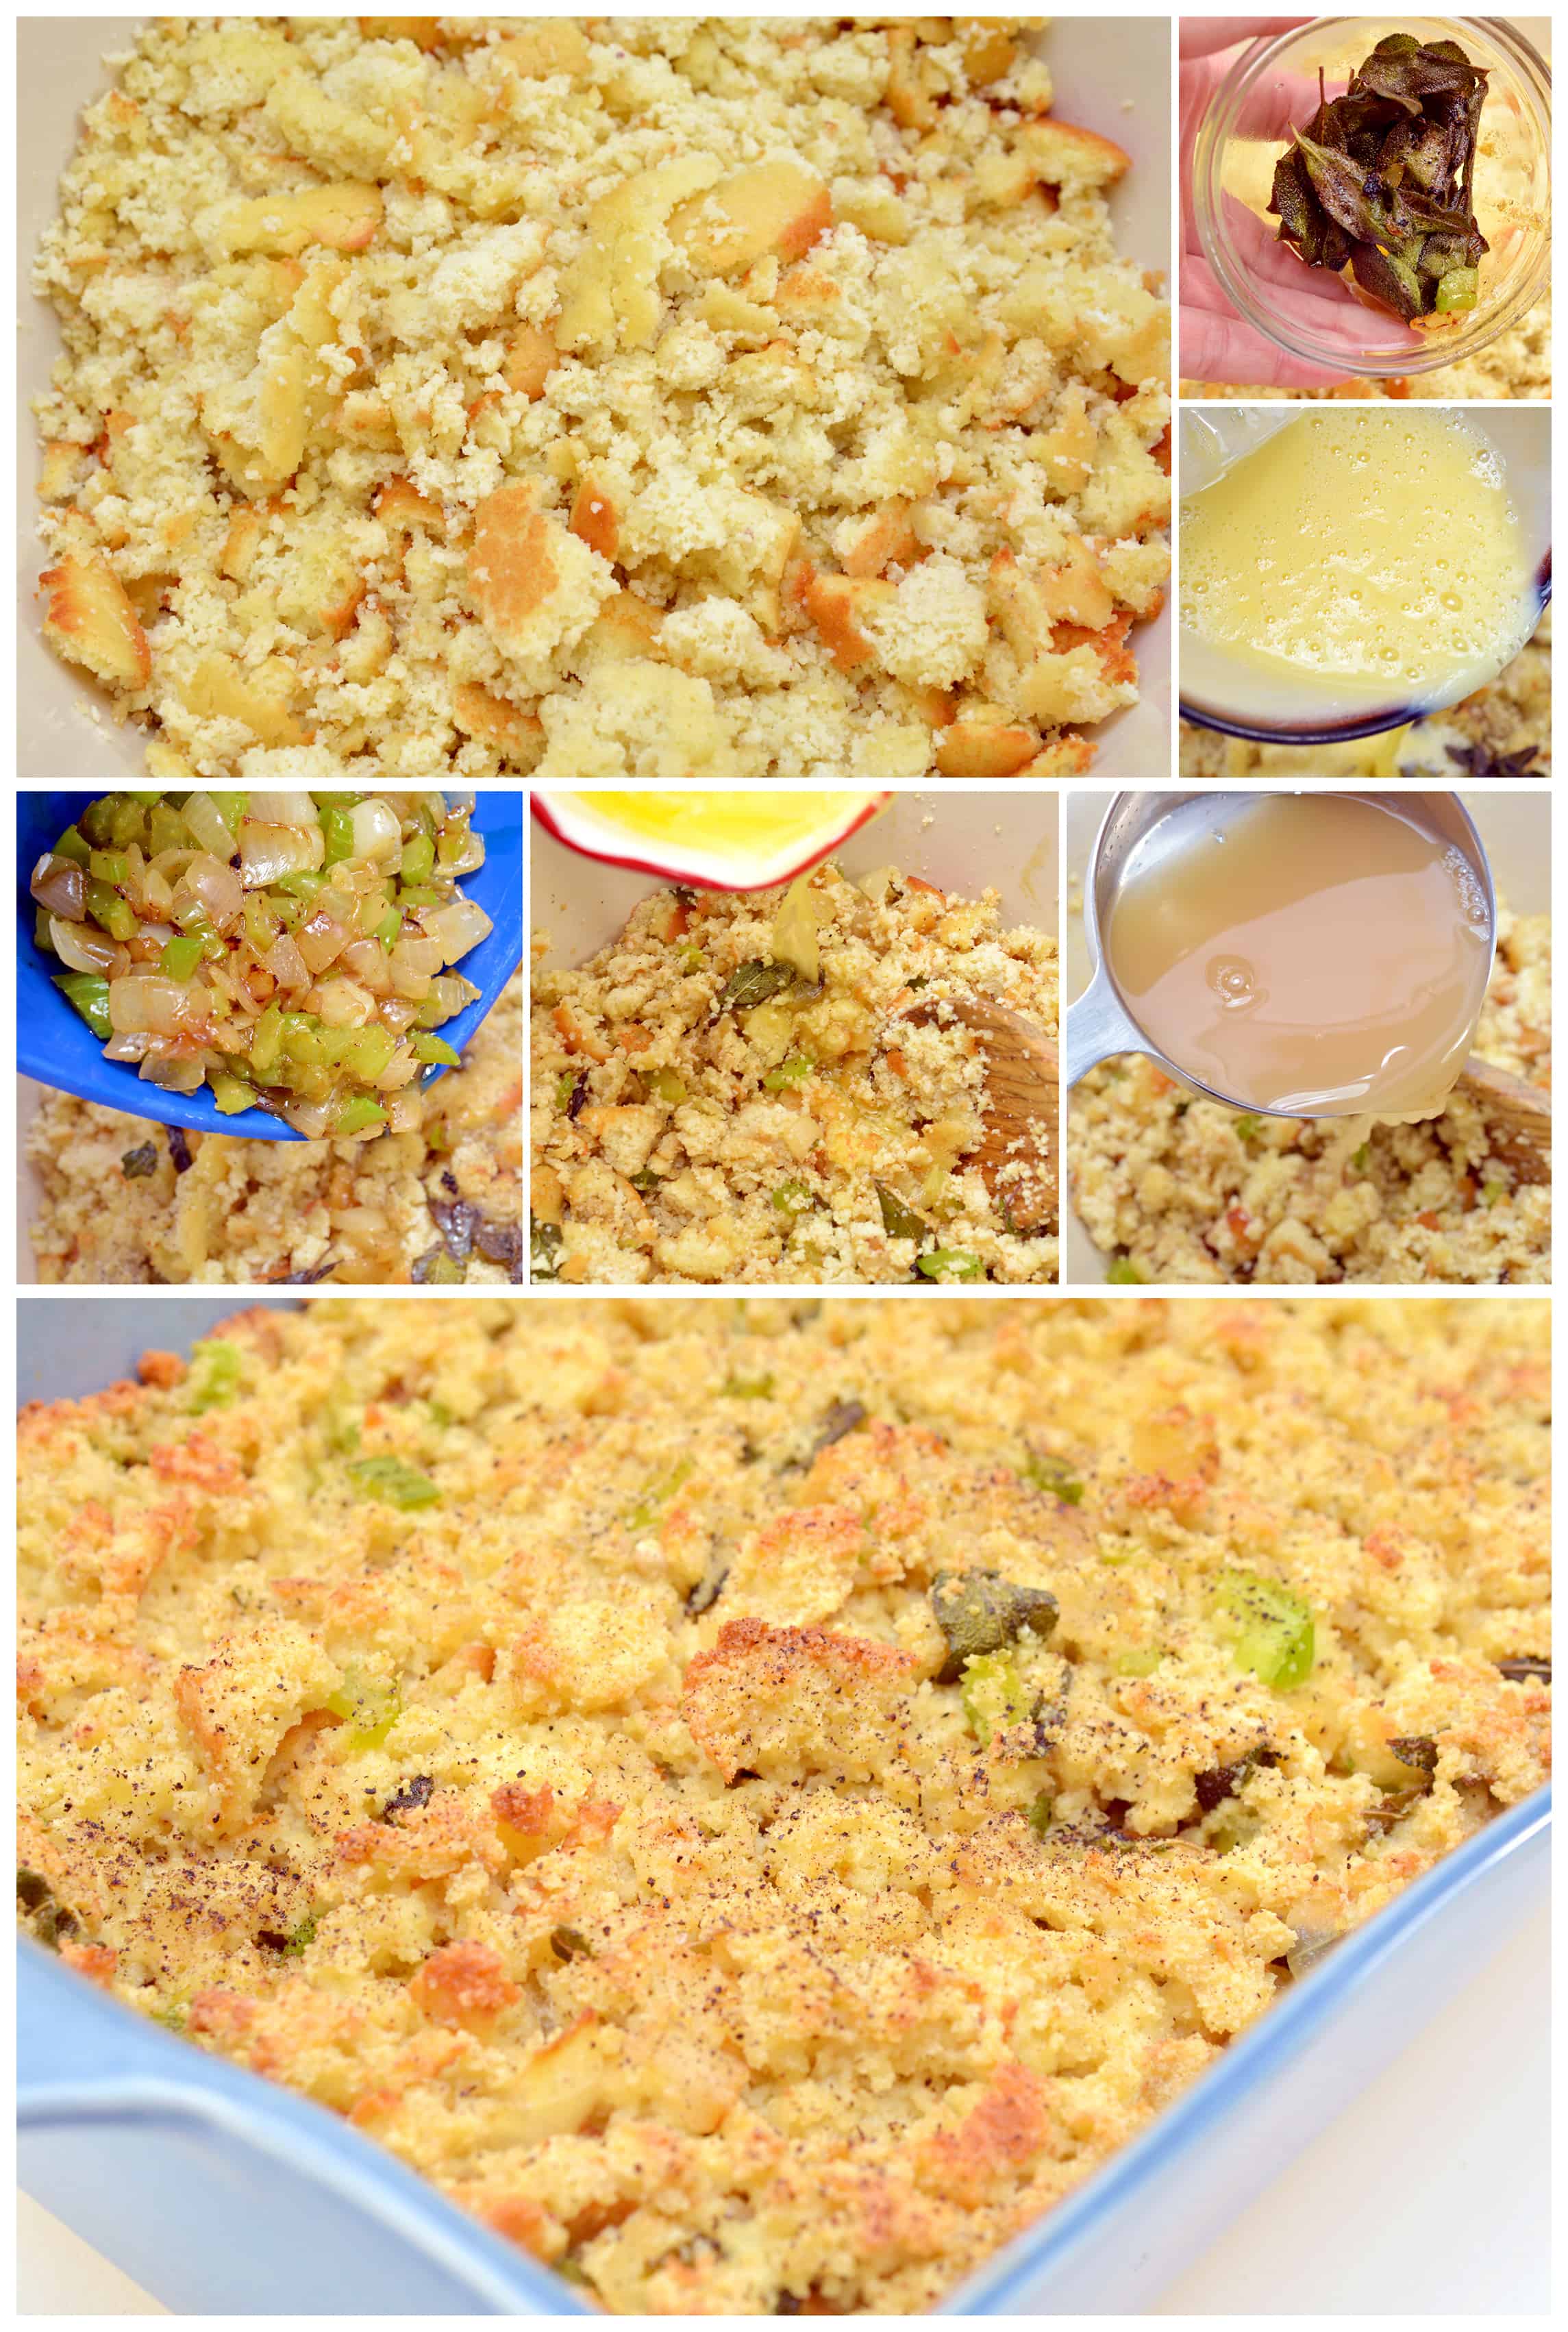 step by step making the stuffing